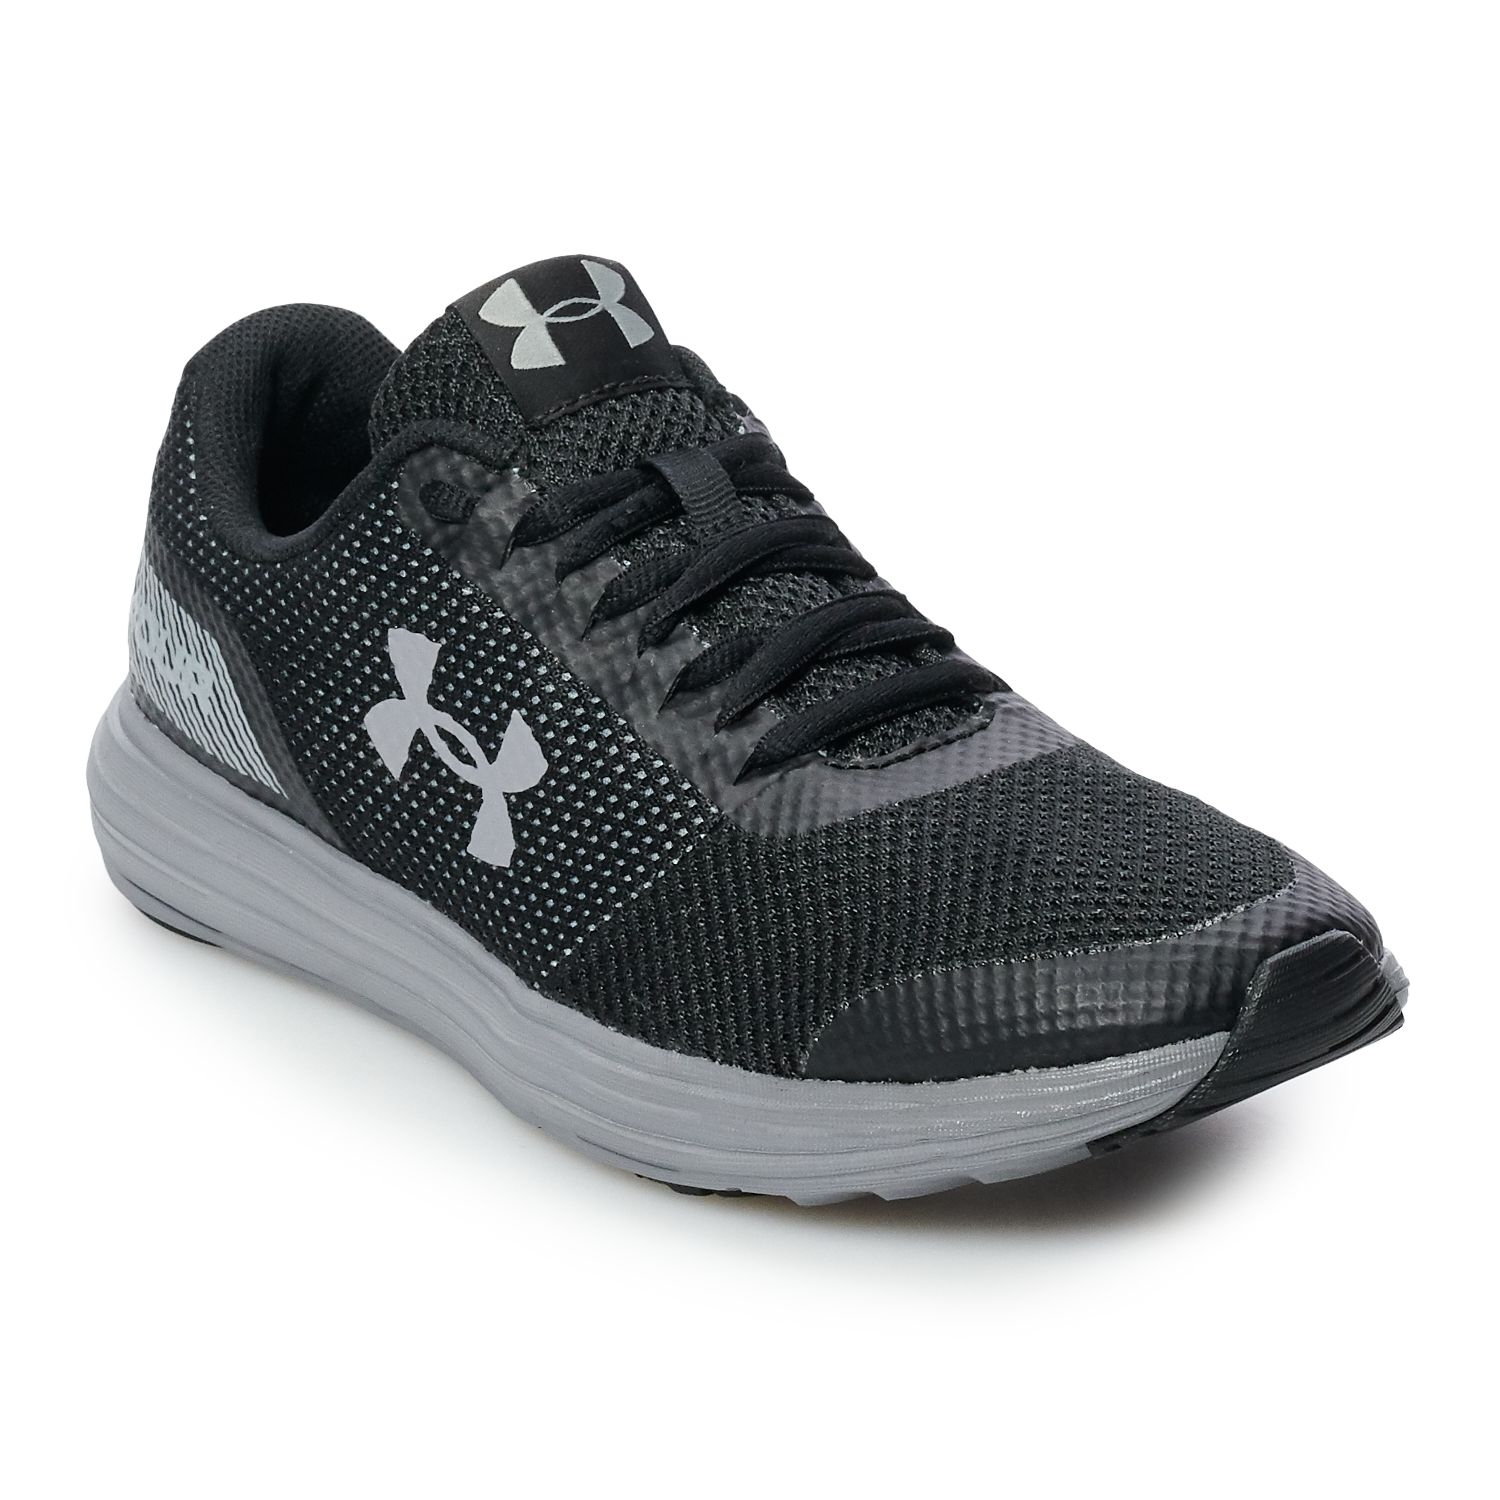 under armour women's surge running shoes reviews